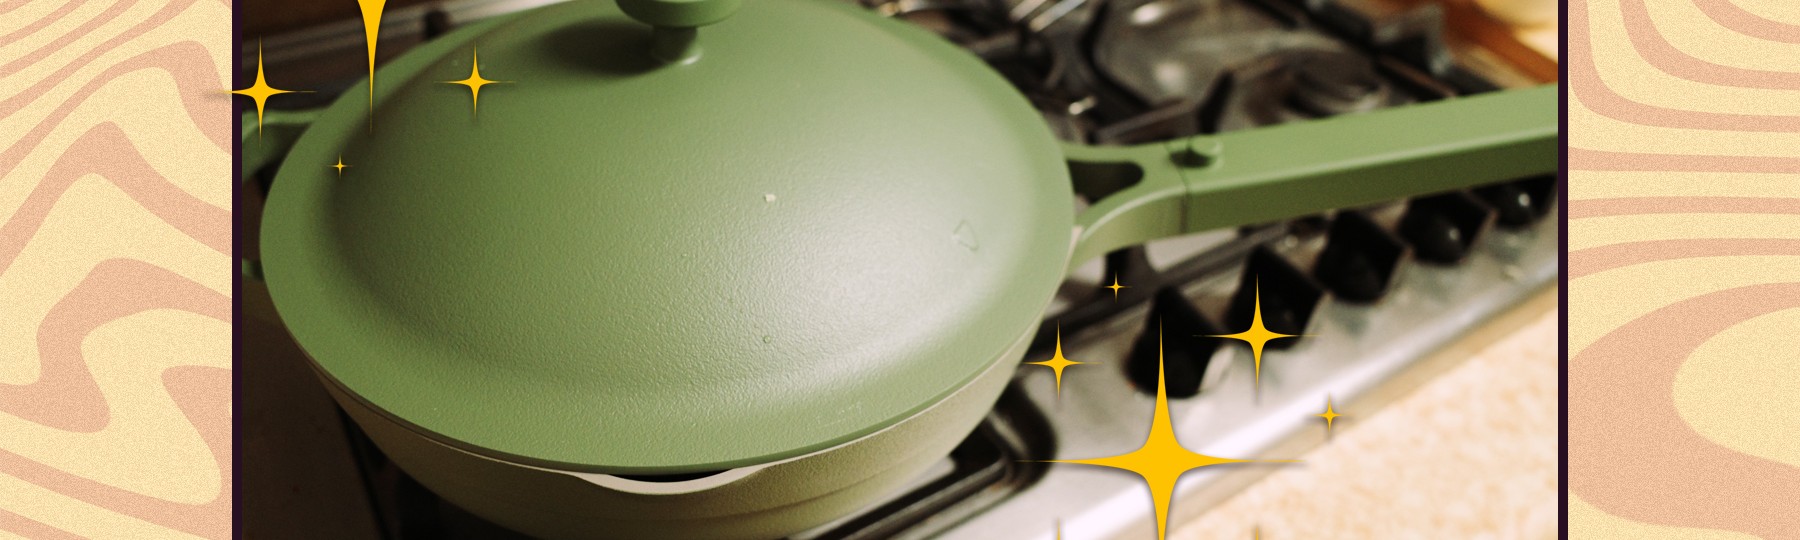 The Jean Patrique 'Whatever Pan' Is Do-It-All Cookware